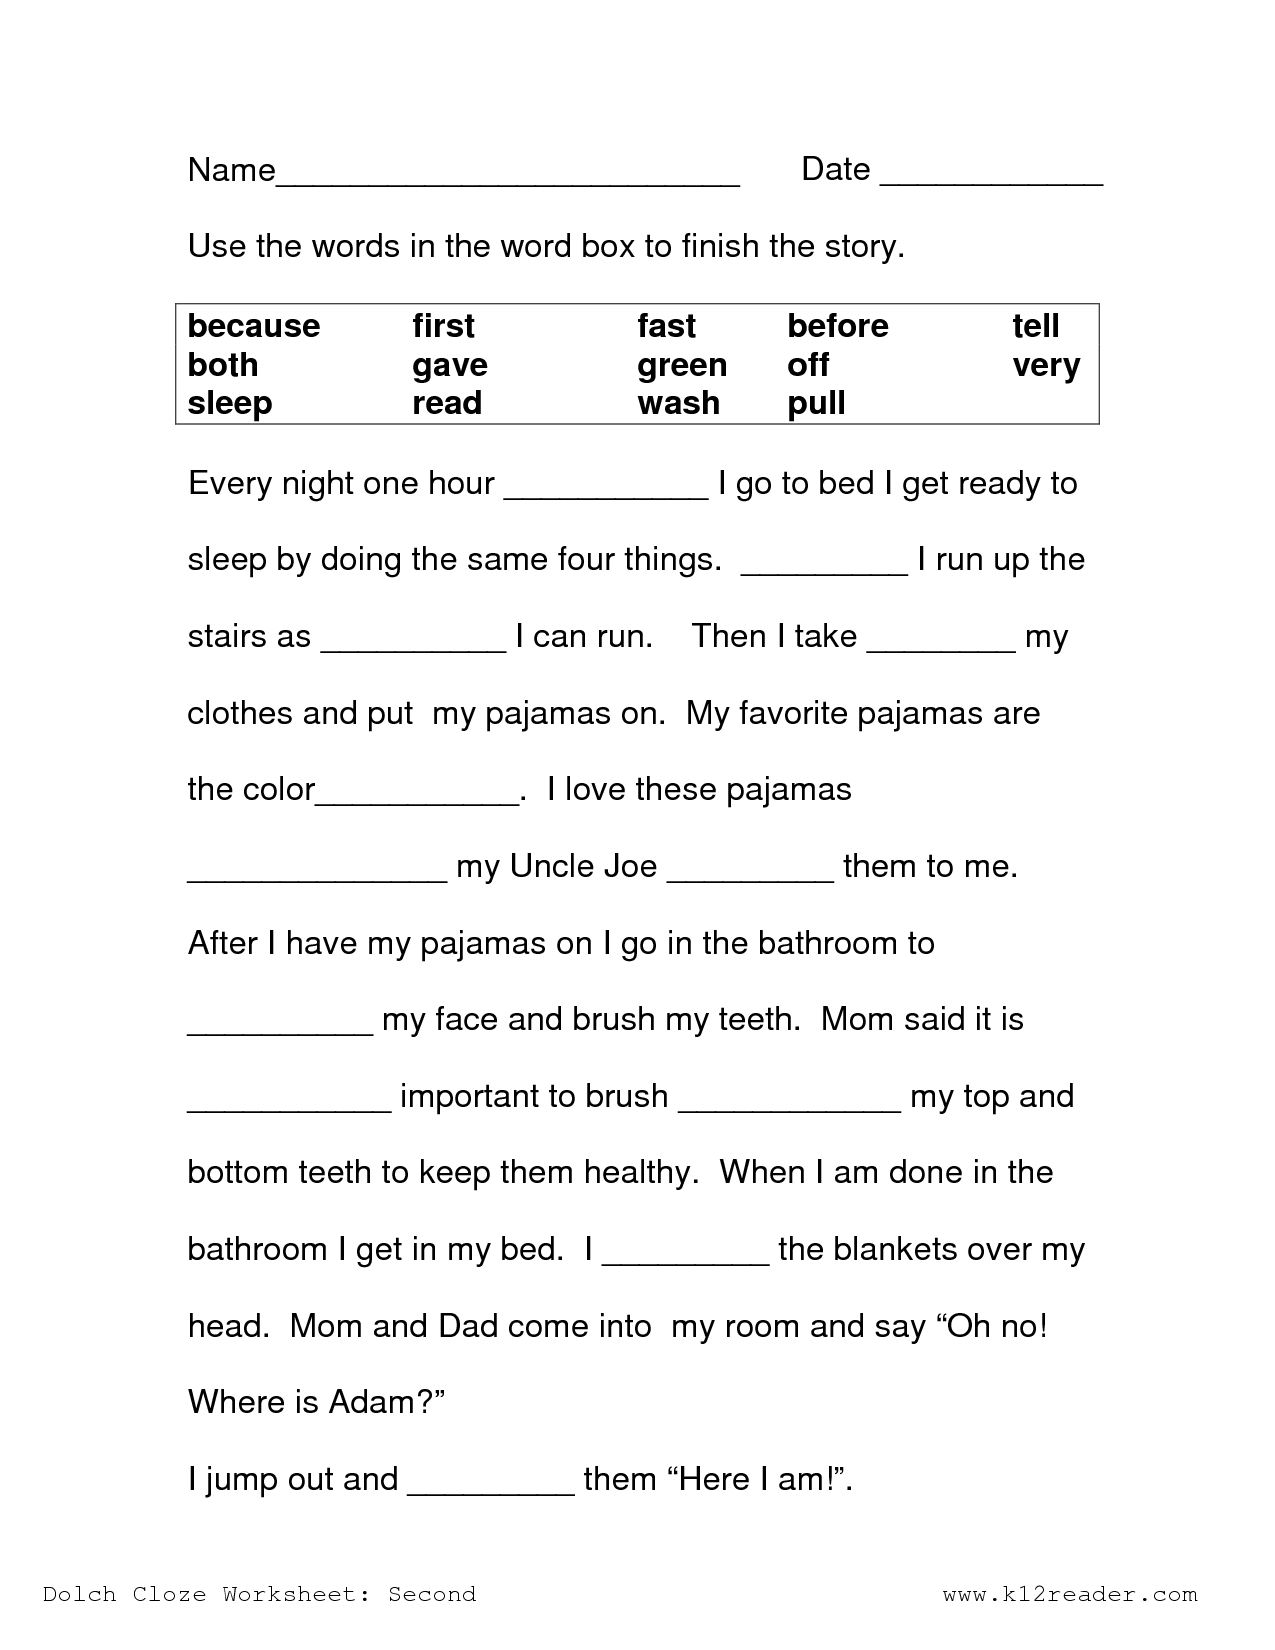 what-if-story-worksheets-99worksheets